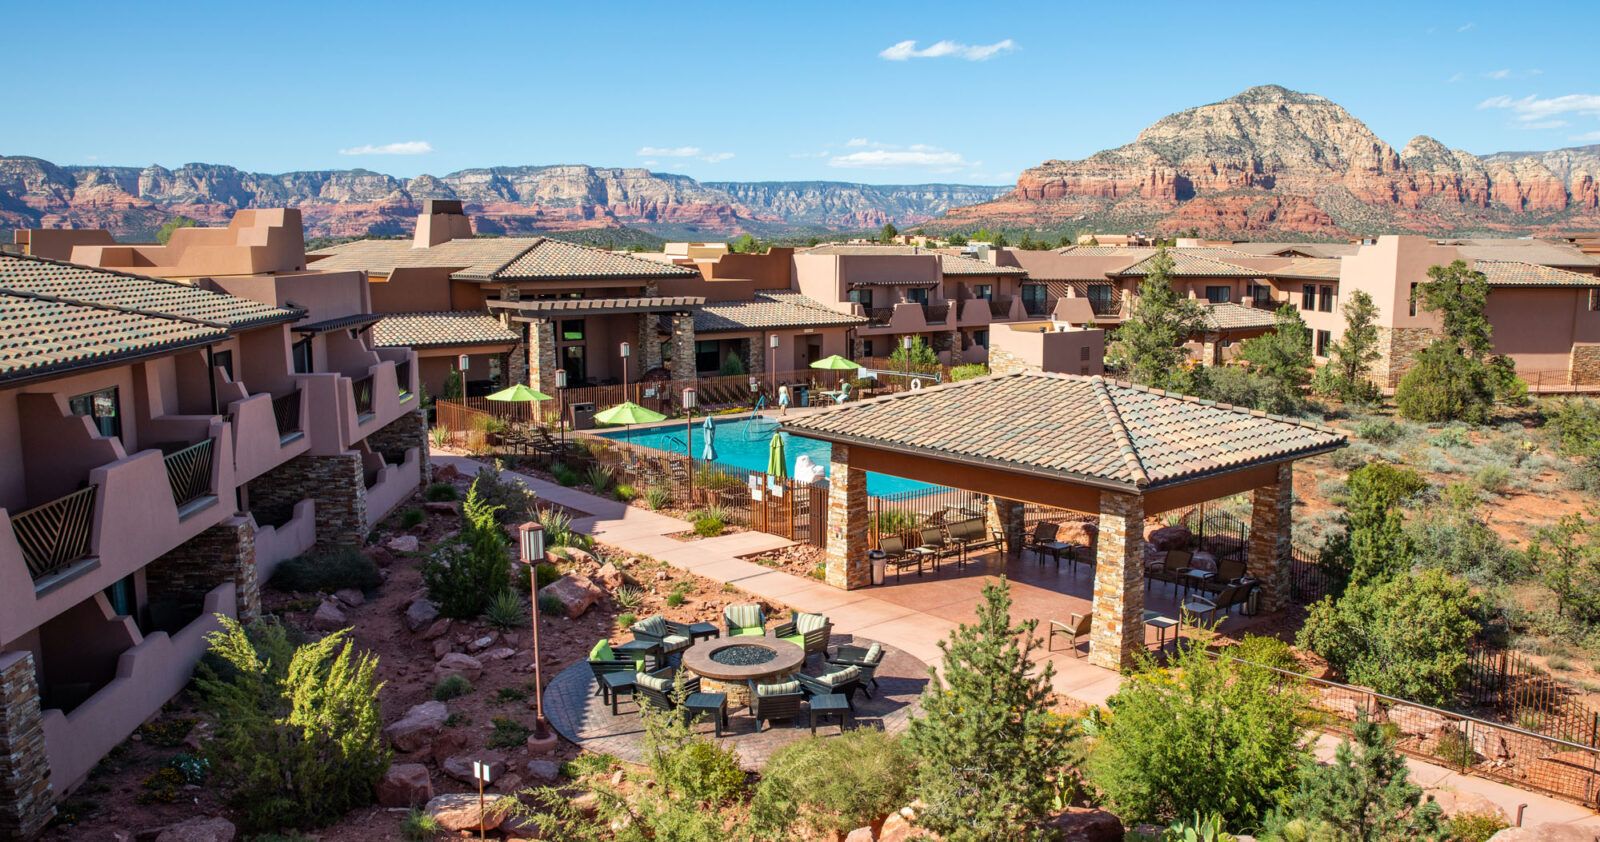 Where to Stay in Sedona